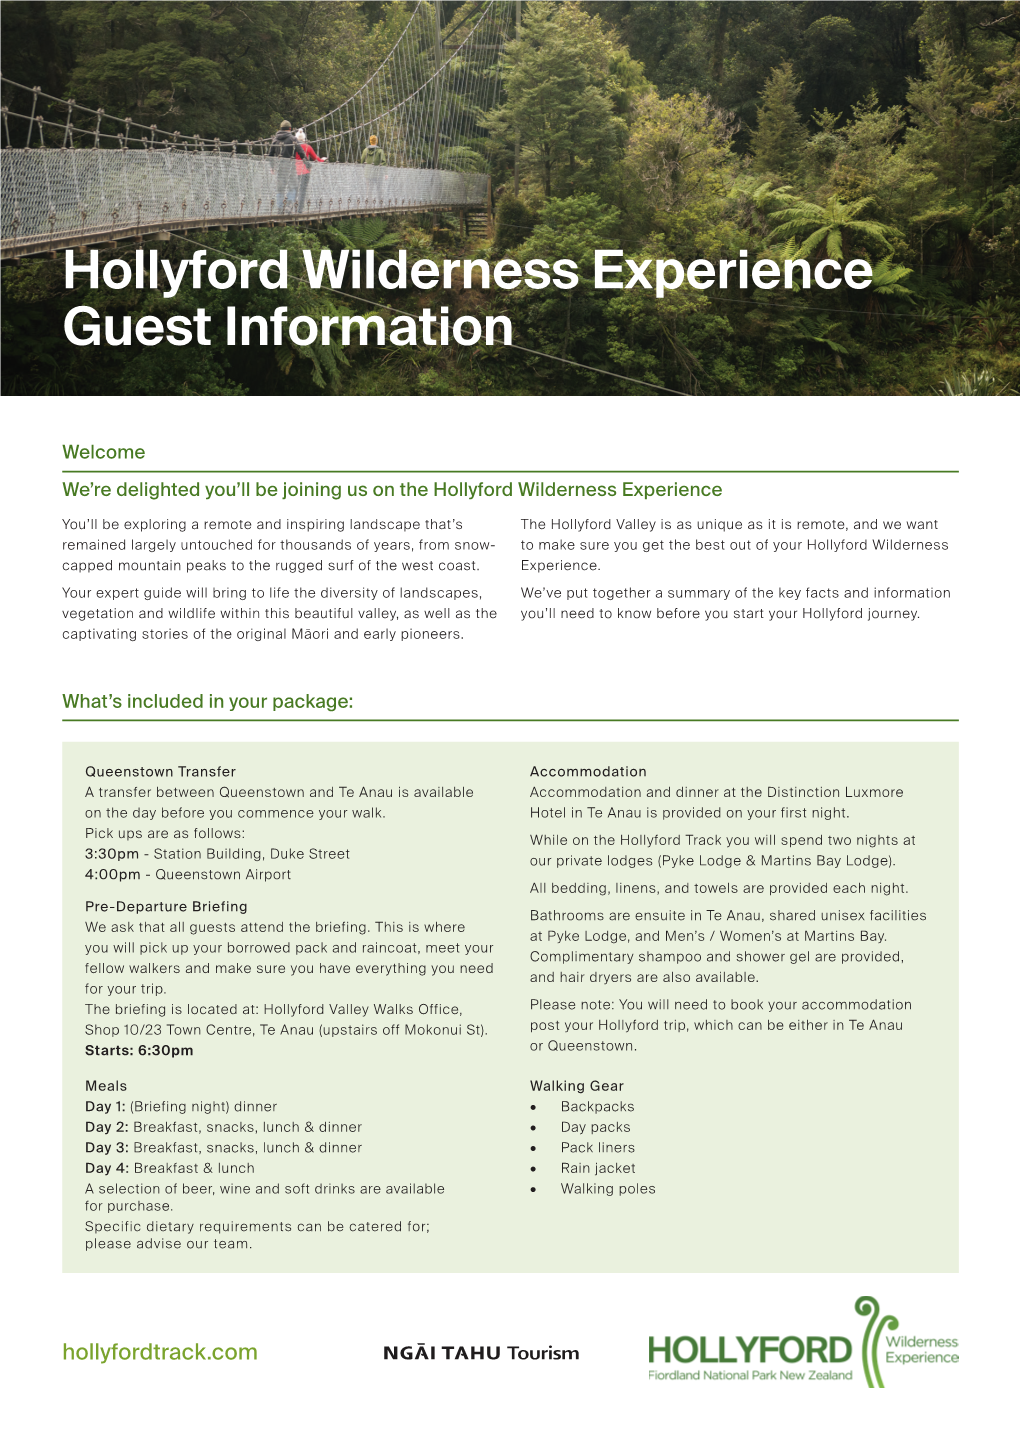 Hollyford Wilderness Experience Guest Information